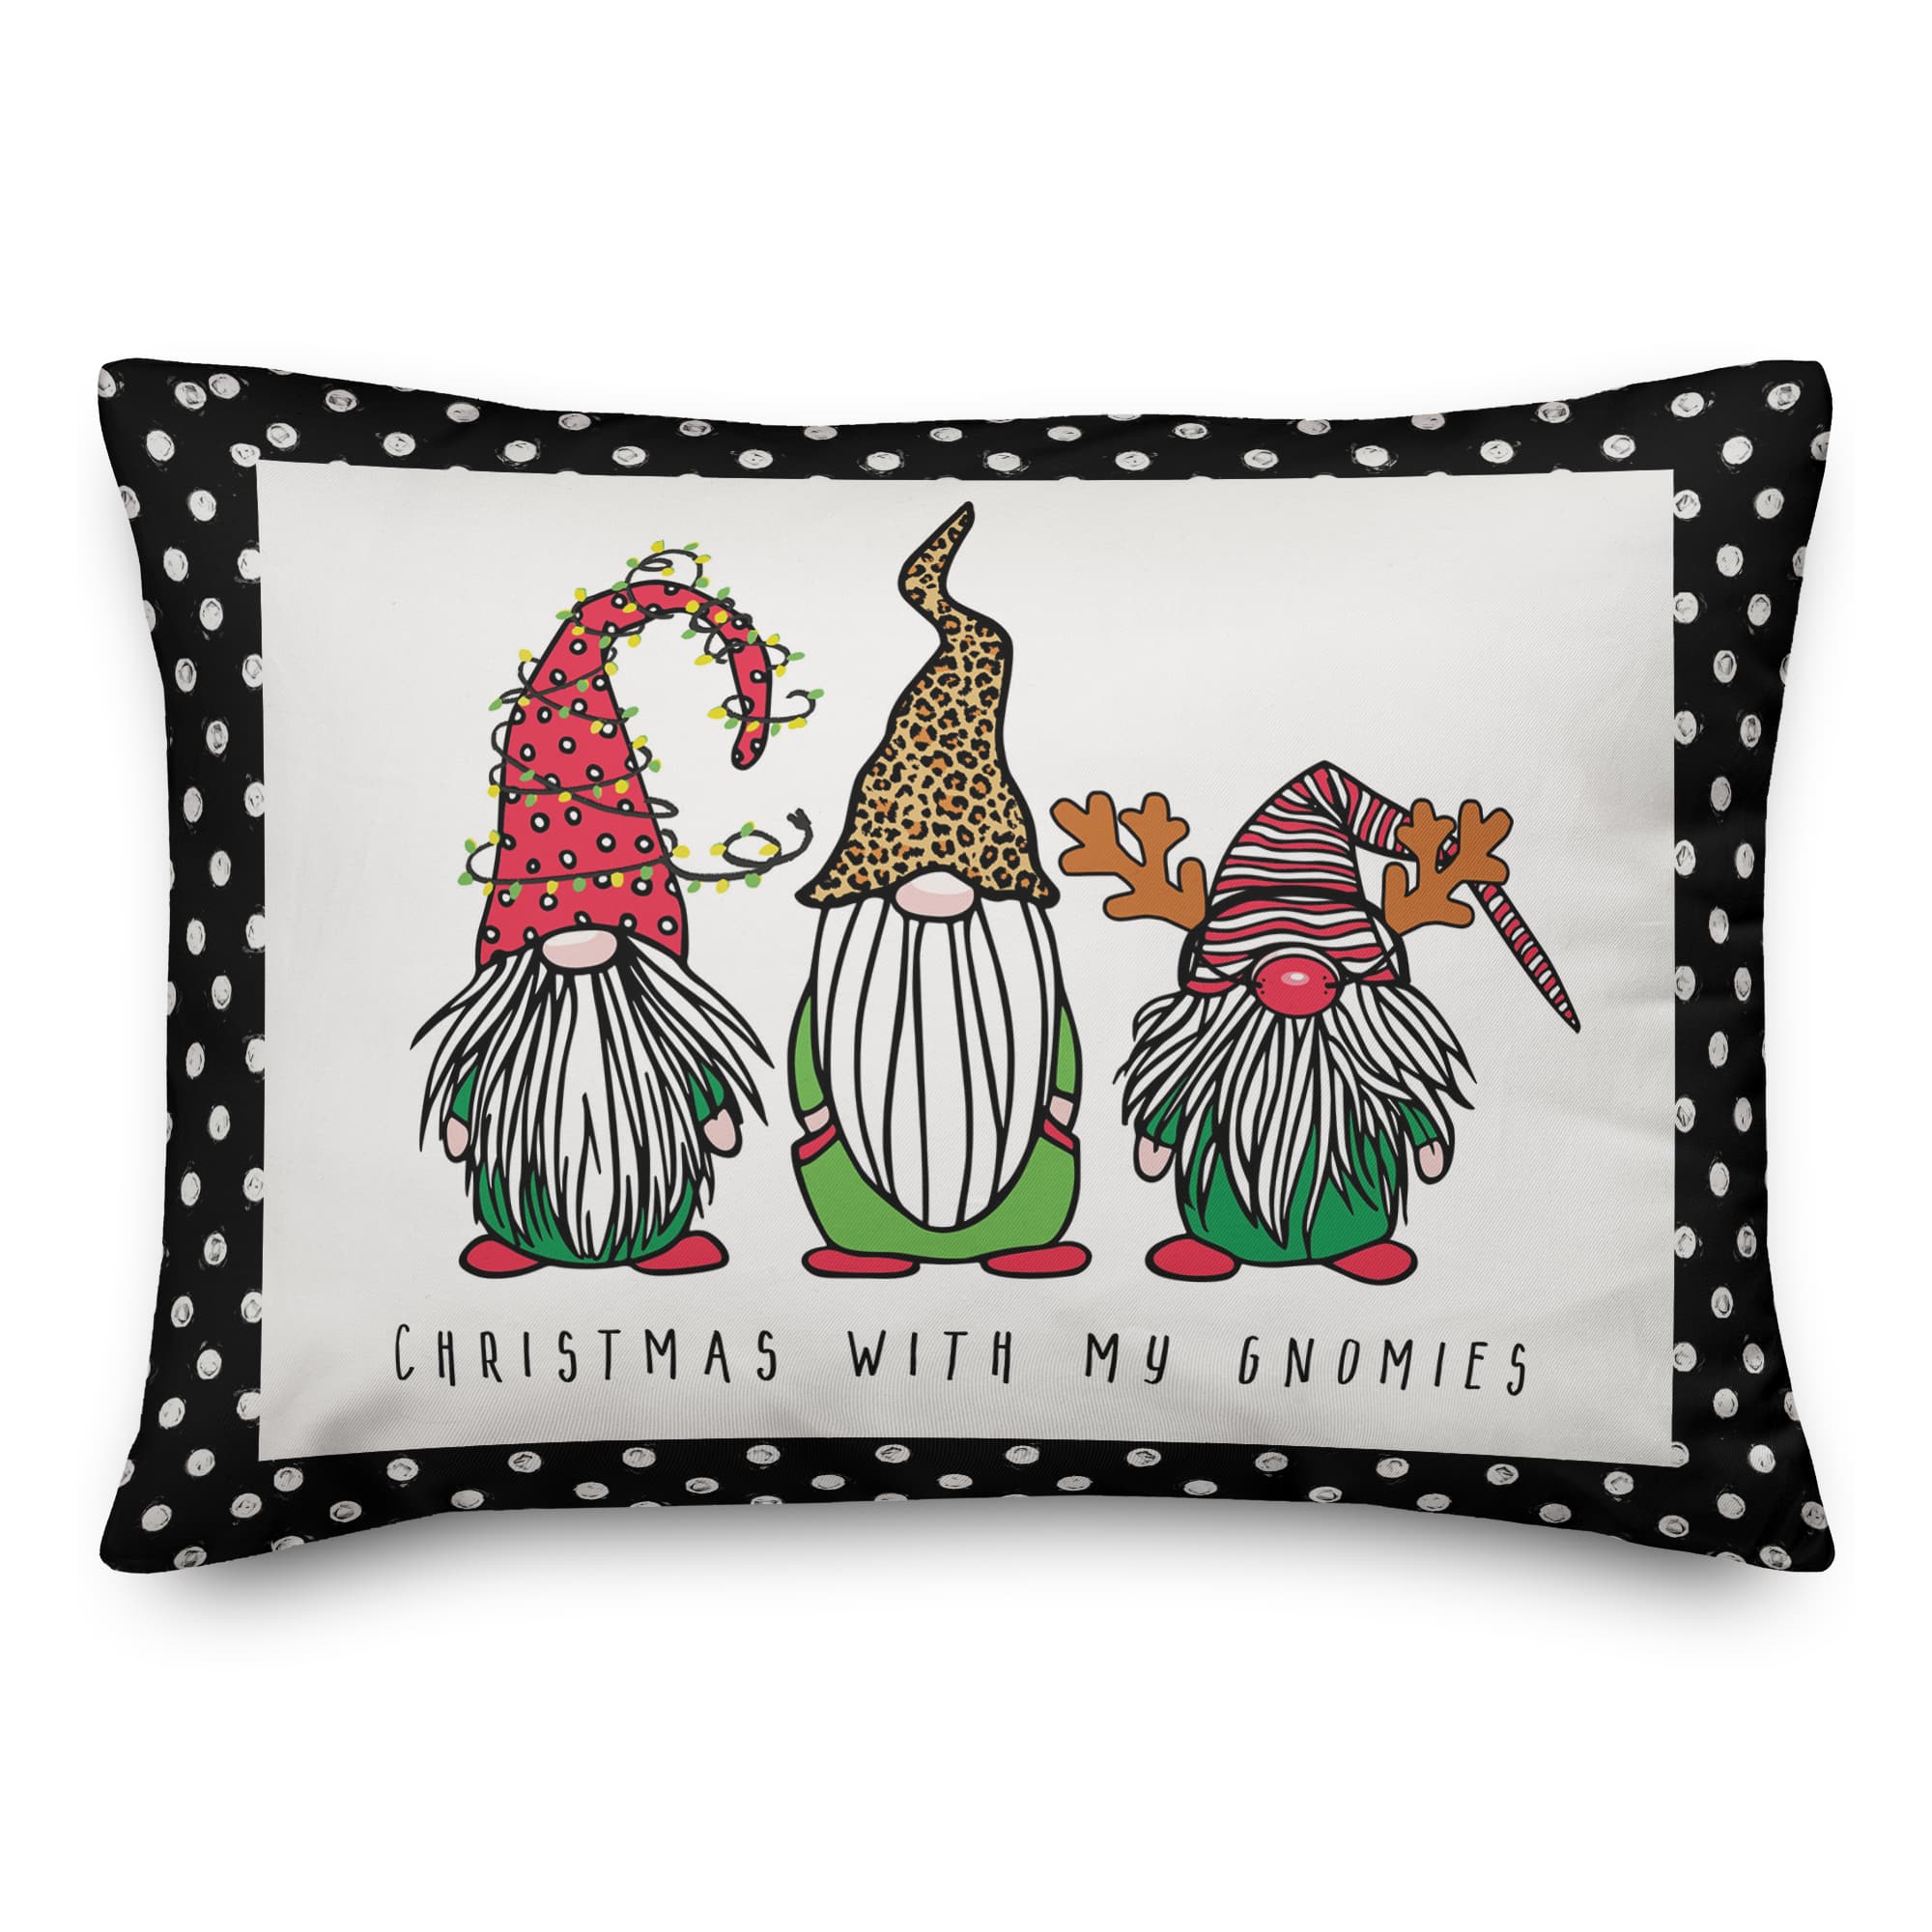 Christmas is Coming Gnomes Throw Pillow